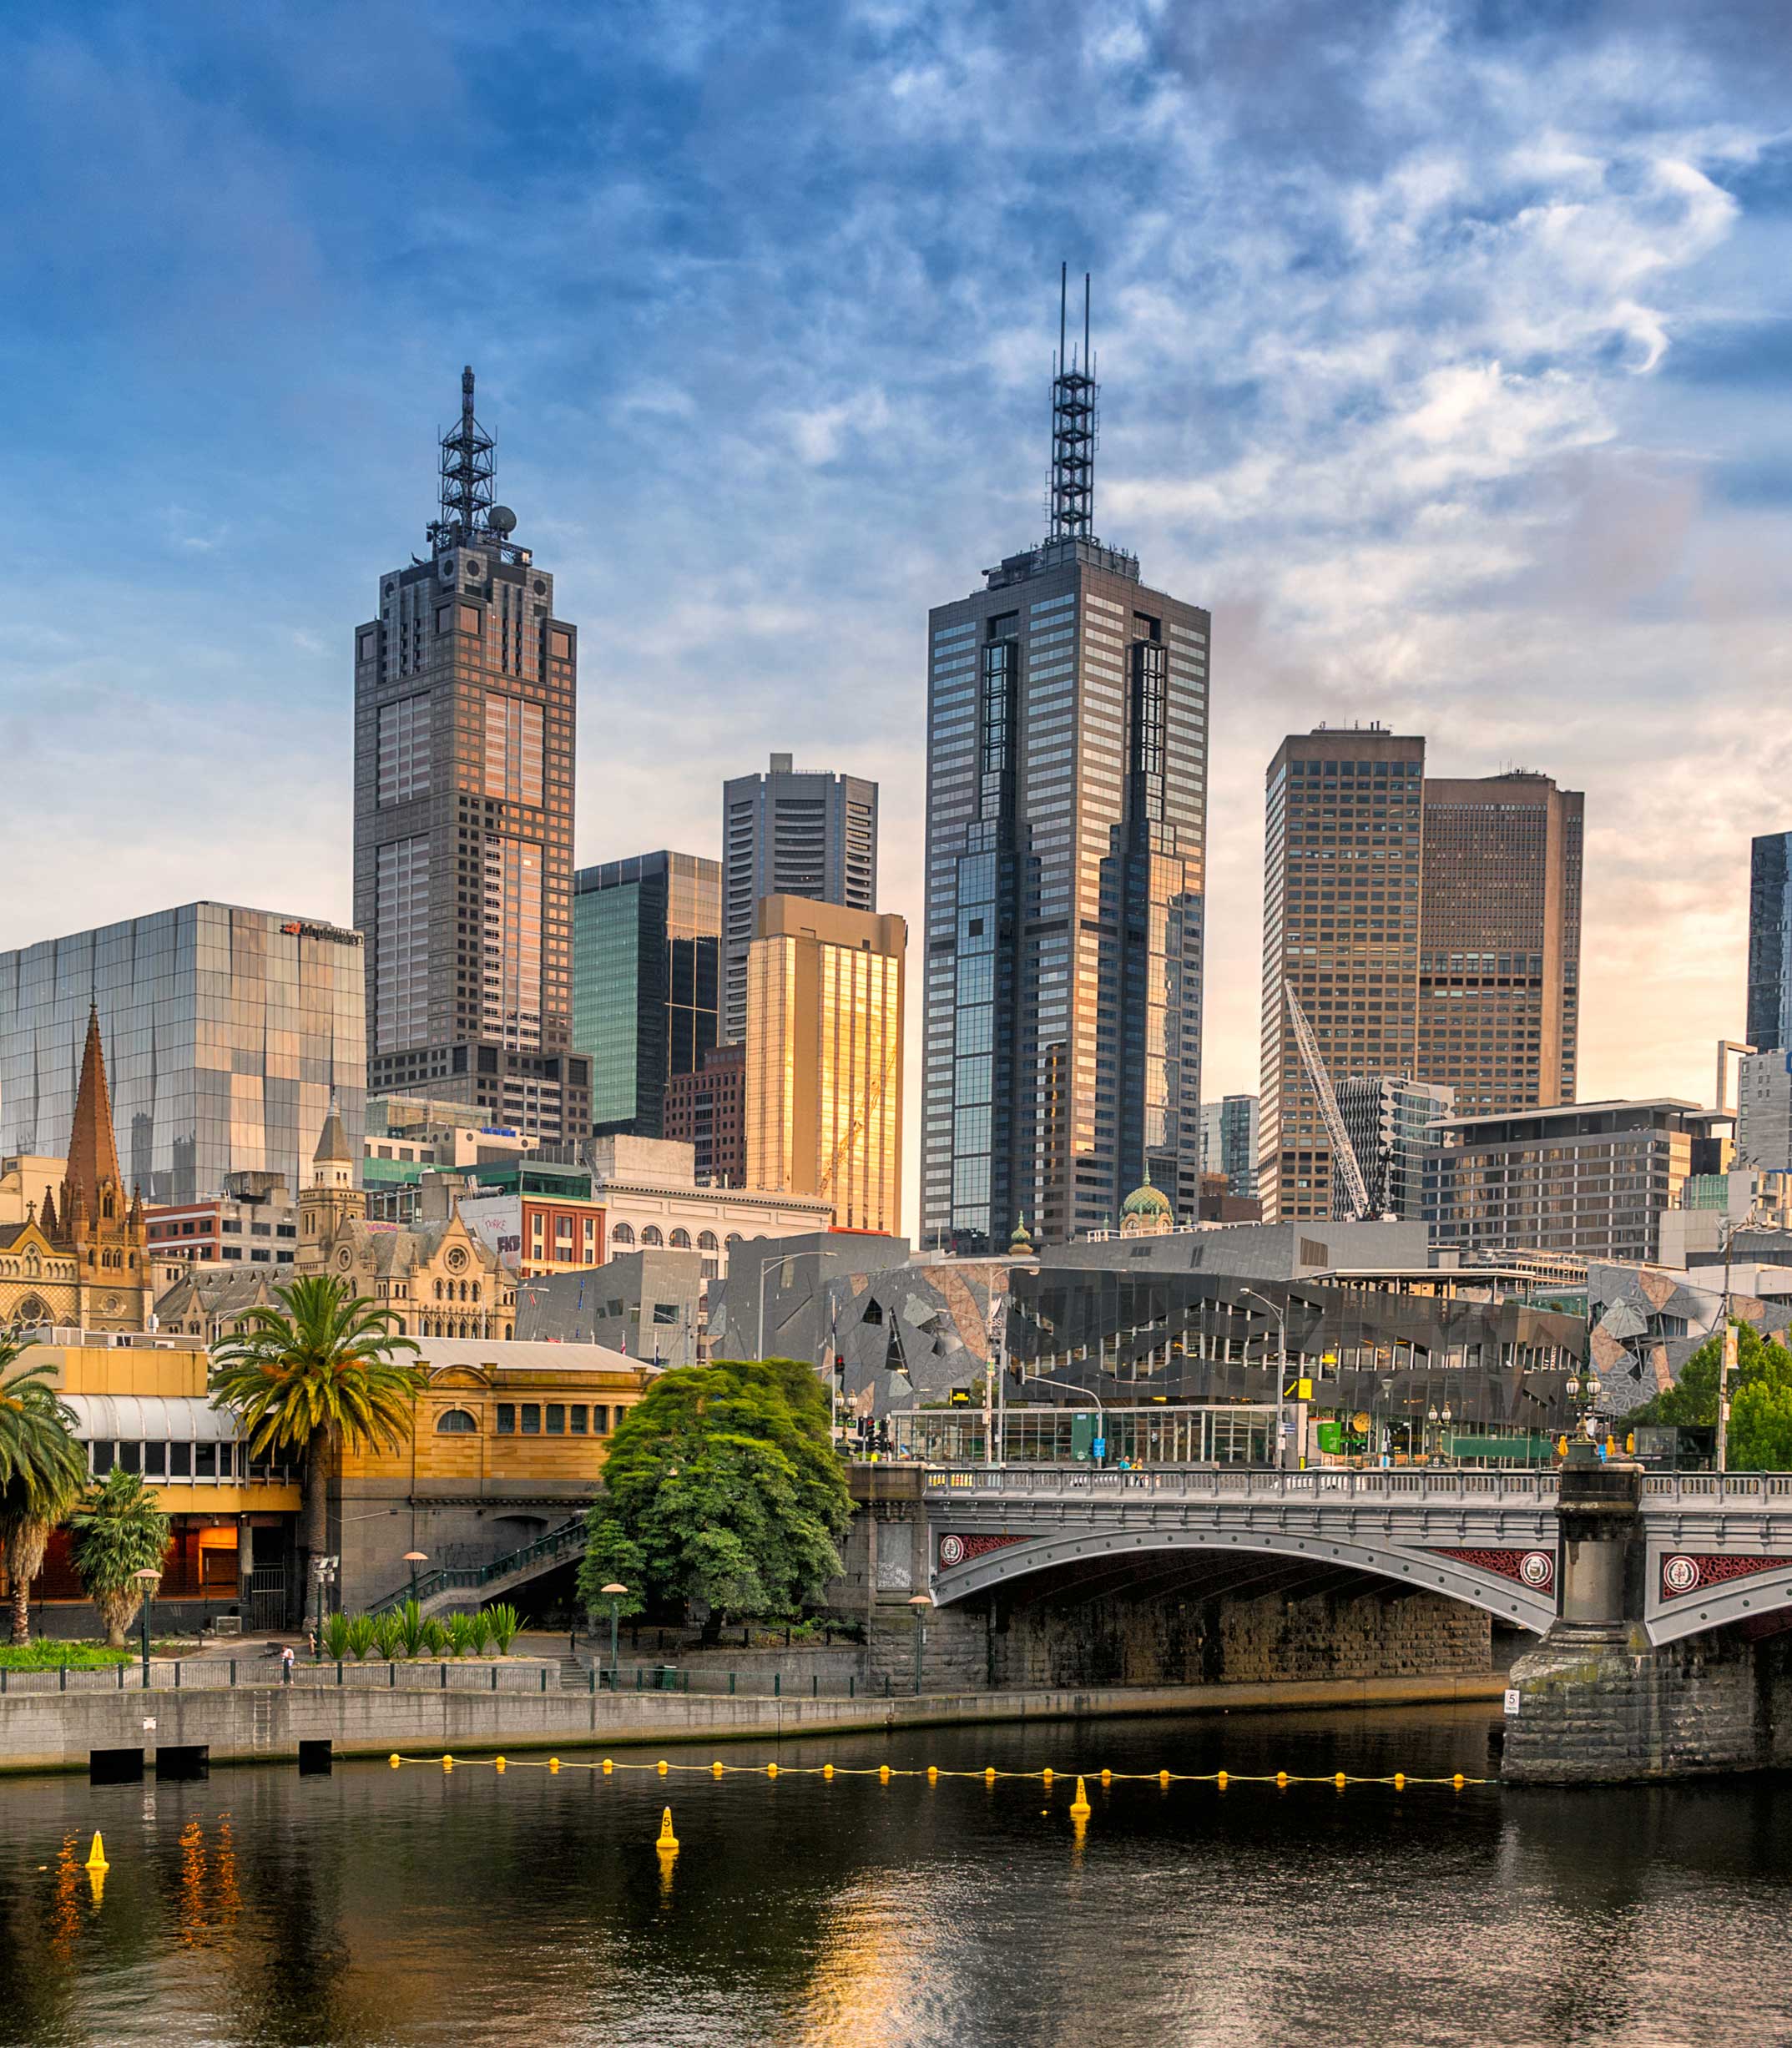 Photo of the Melbourne skyline across the Yarra River